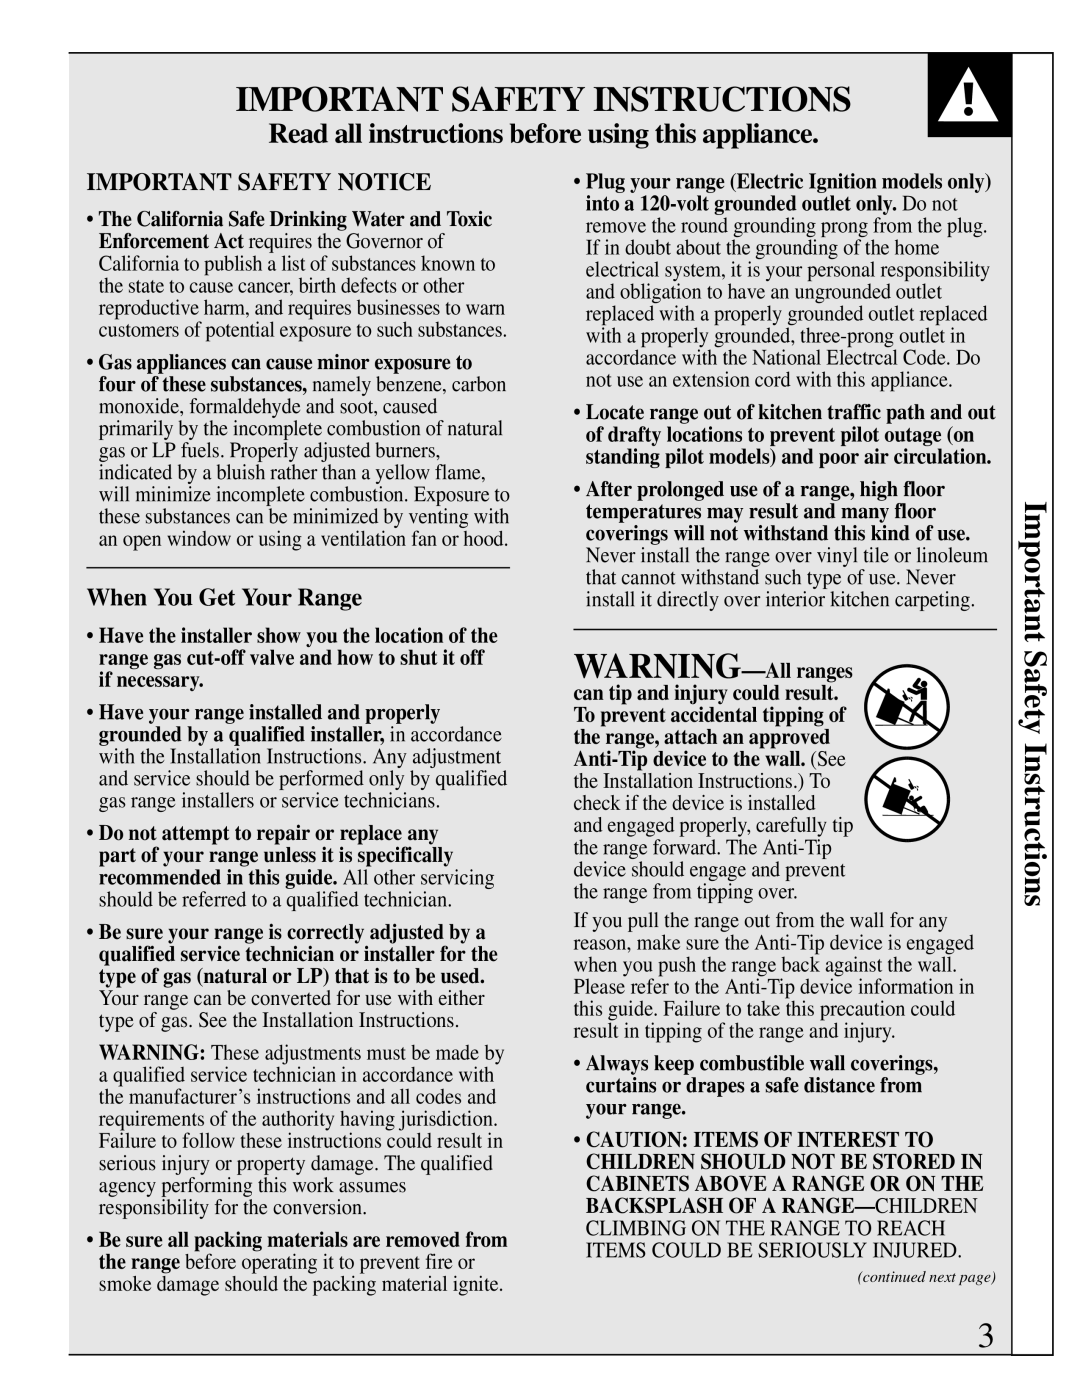 GE 164D2966P079 Important Safety Instructions, Read all instructions before using this appliance, Important Safety Notice 